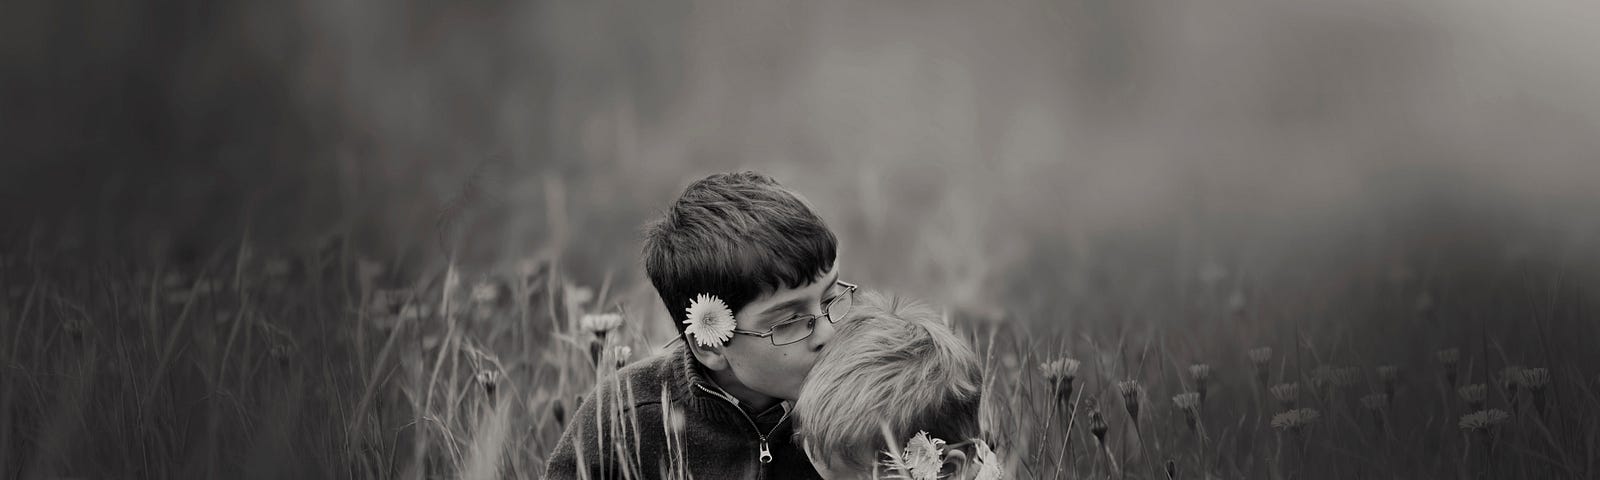 Boy kissing a younger boy’s head in a field surrounded by flowers